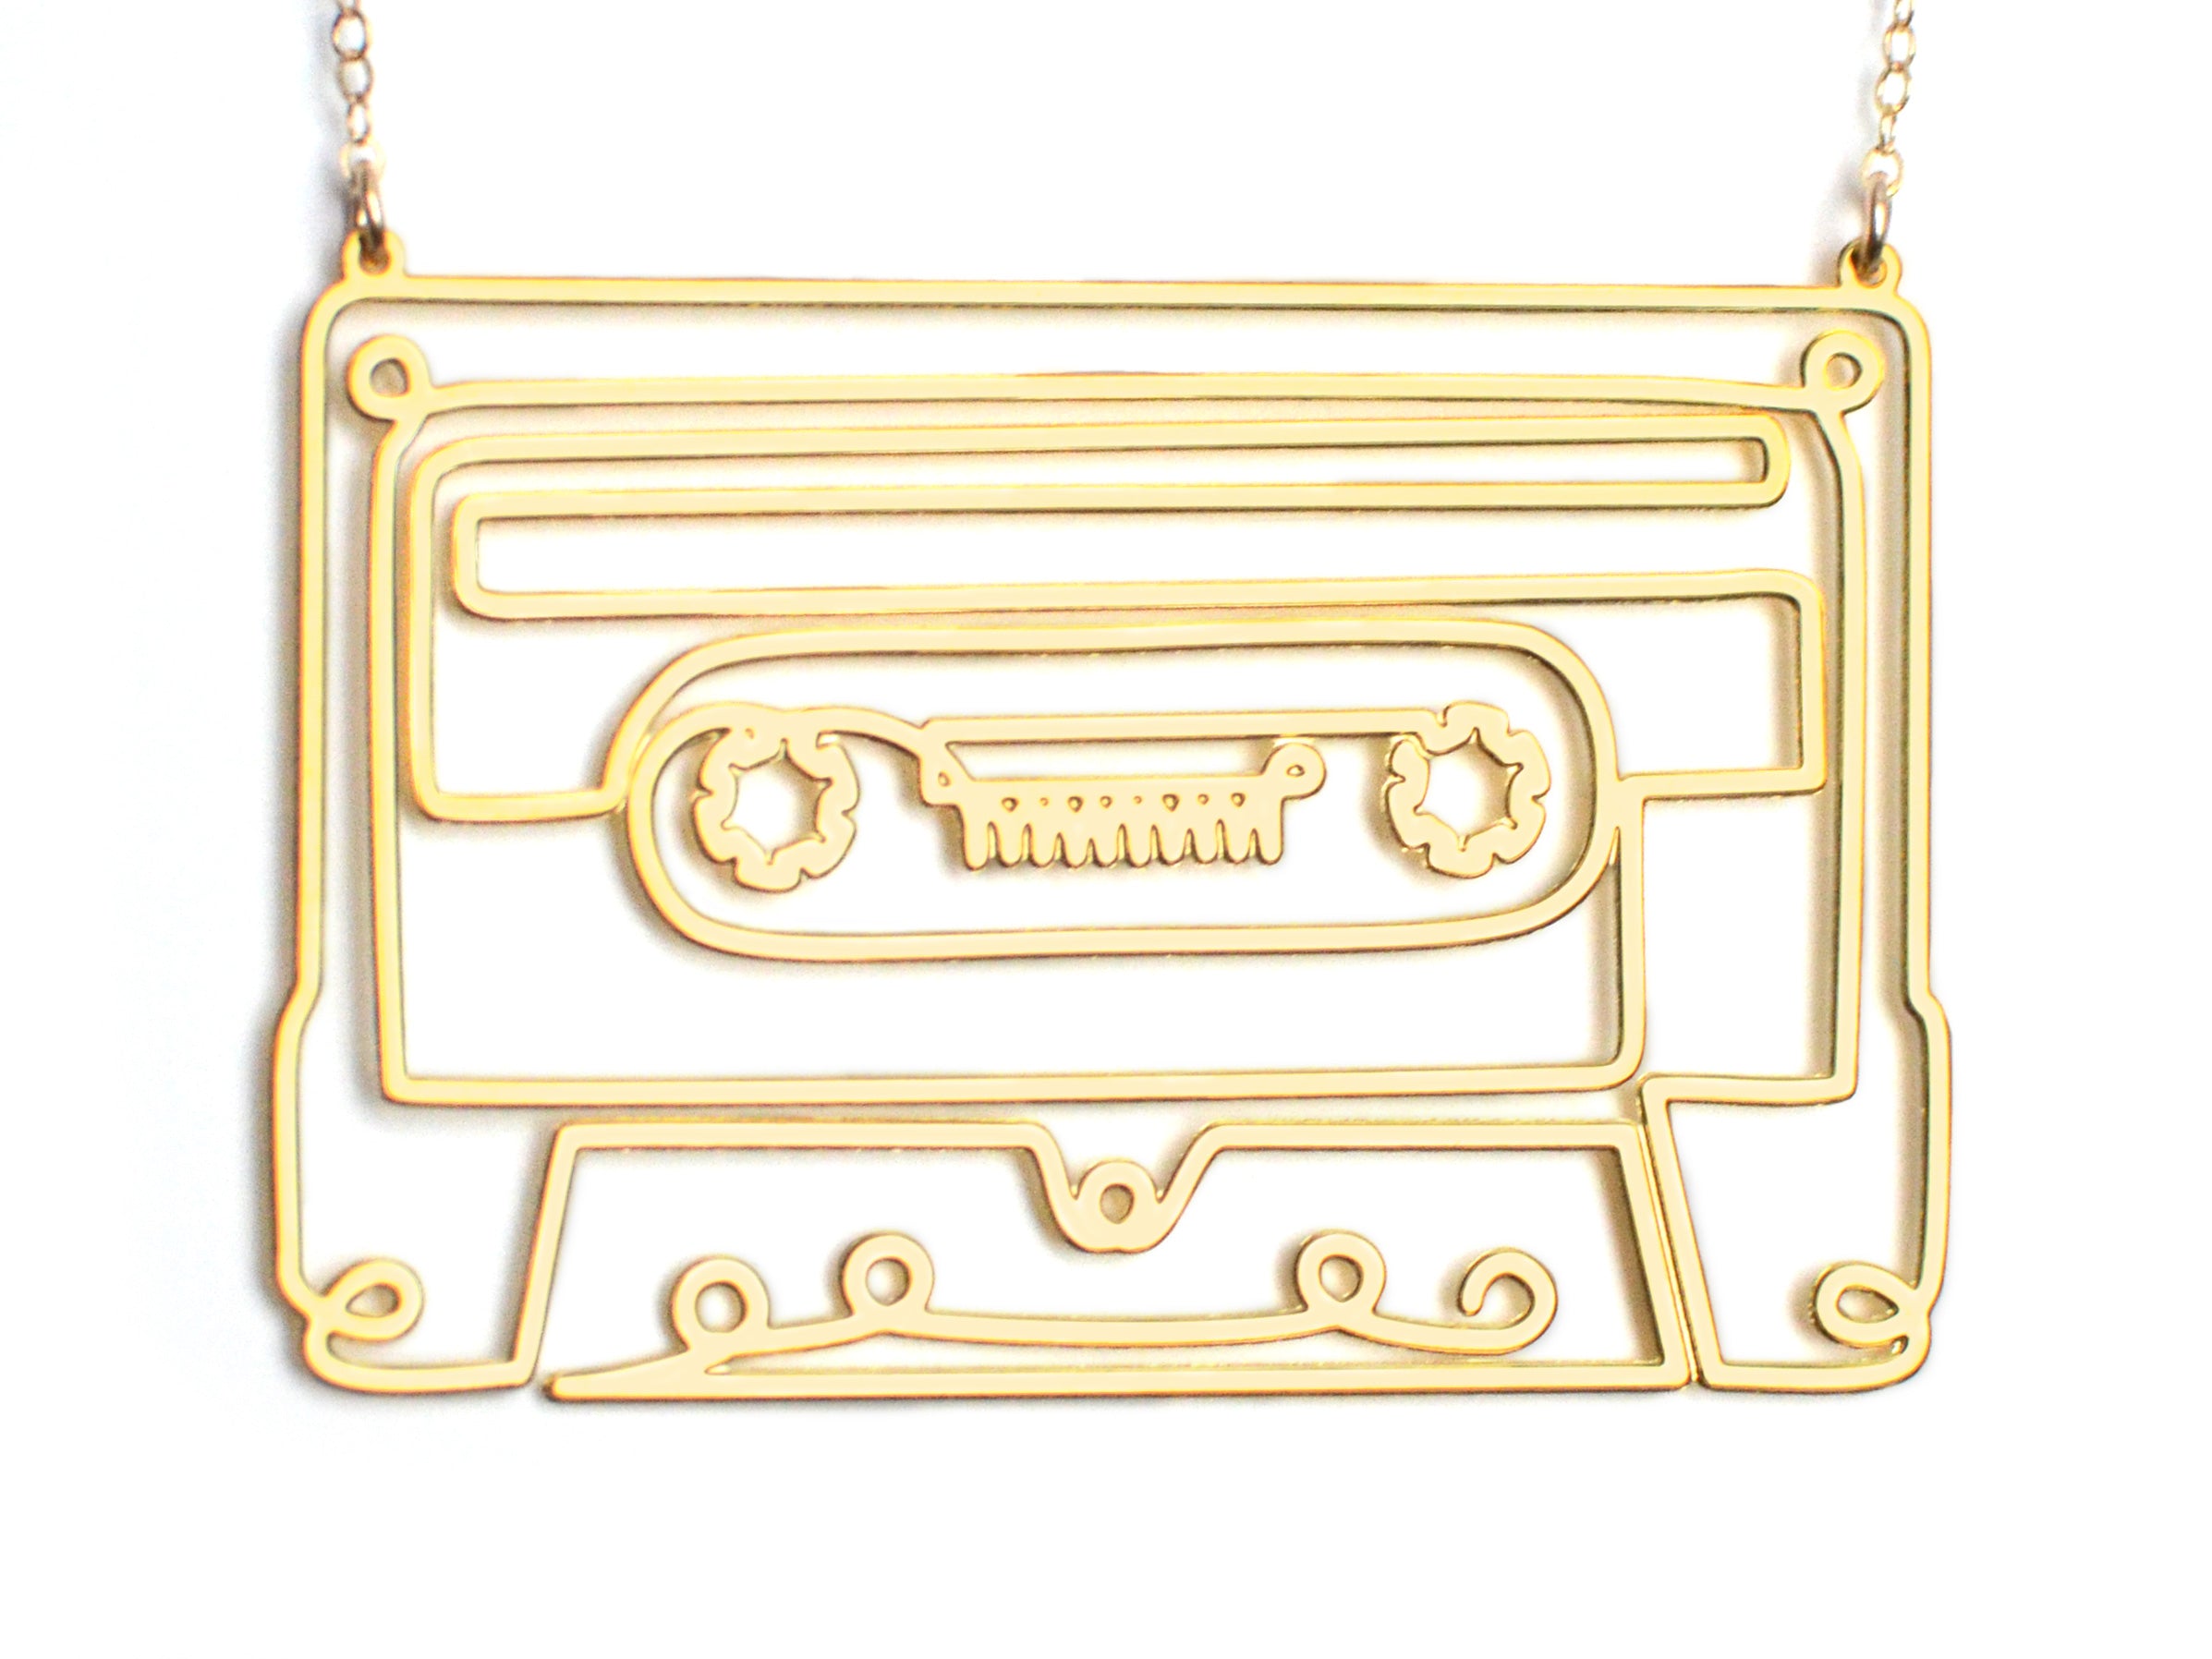 Cassette Necklace - High Quality, Affordable, Hand Drawn, Courageous Creators Necklace - Available in Gold and Silver - Made in USA - Collaboration with Honto - Brevity Jewelry